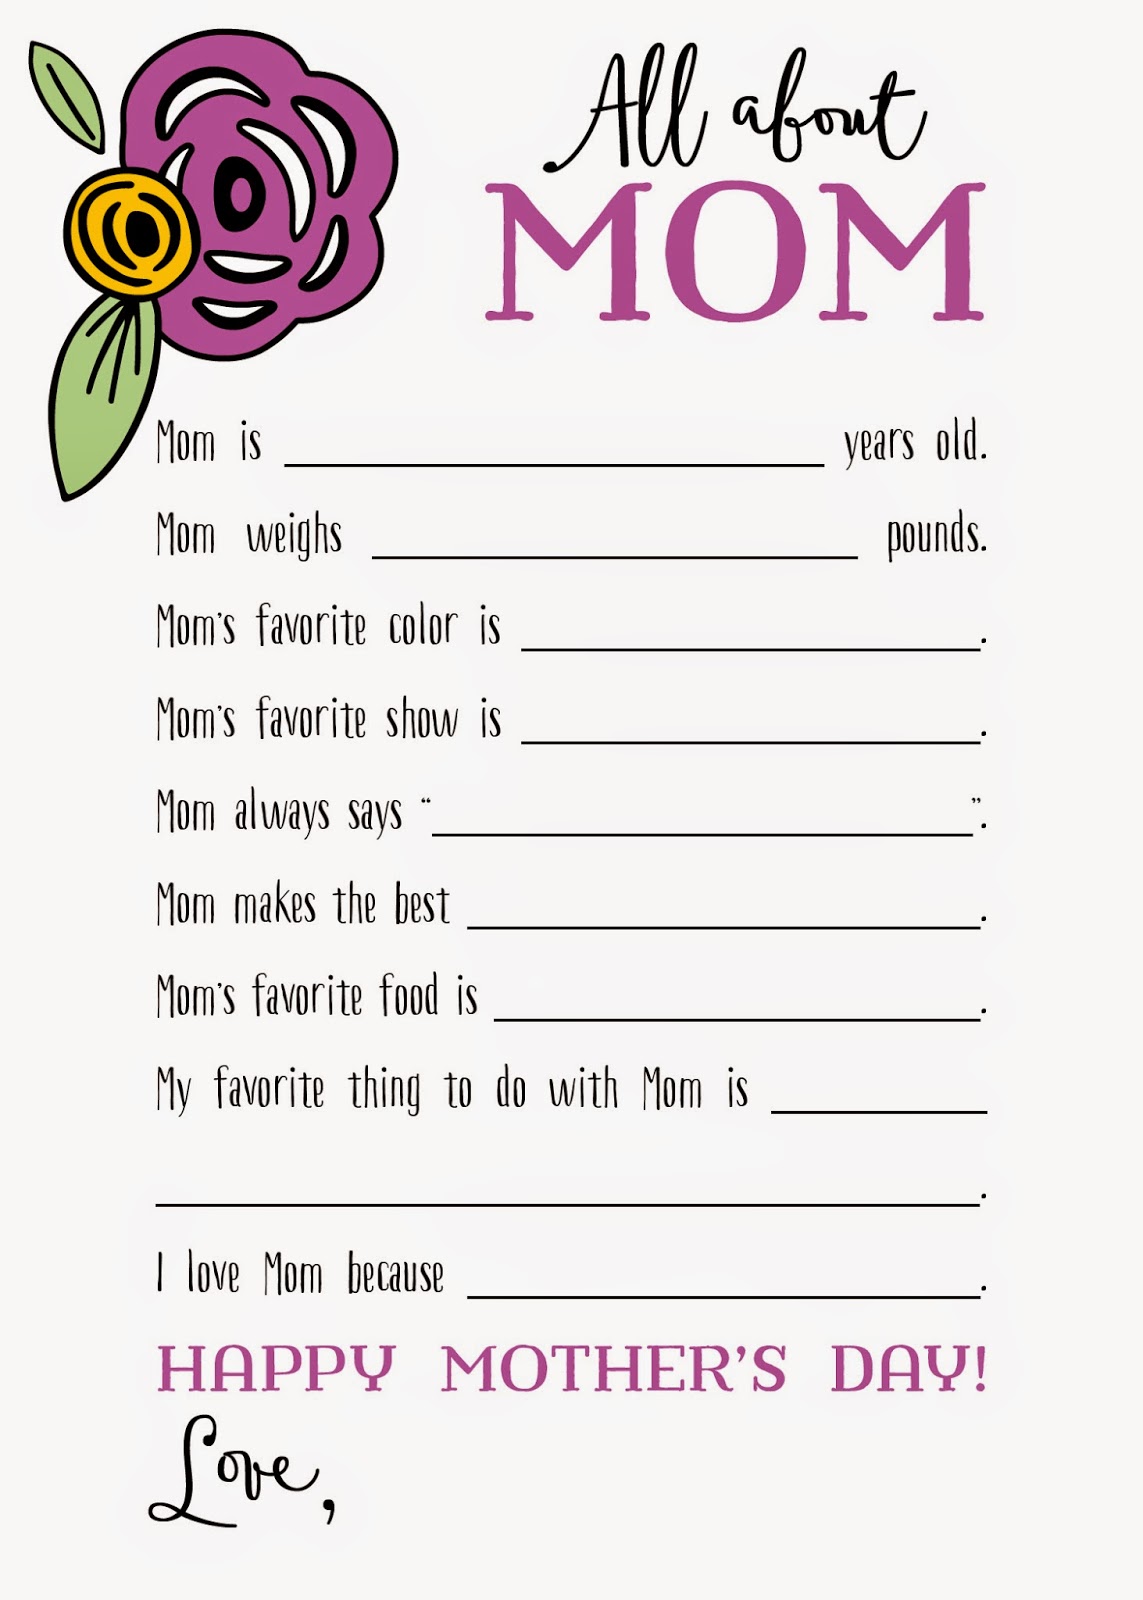 All About Mom Printable Free